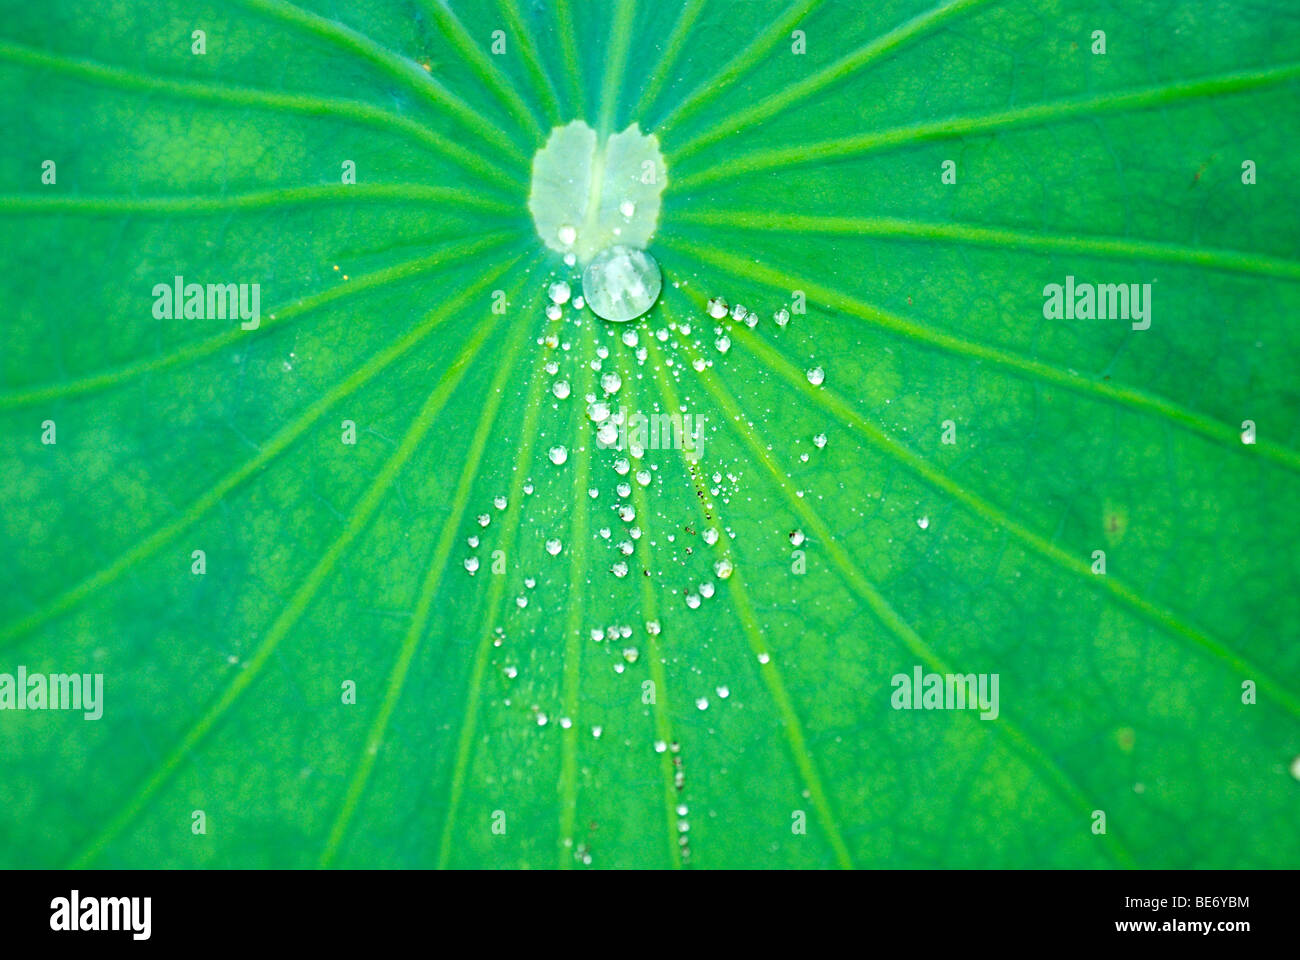 Drops on the water-repellent leaf of the lotus (Nelumbo nucifera) Stock Photo